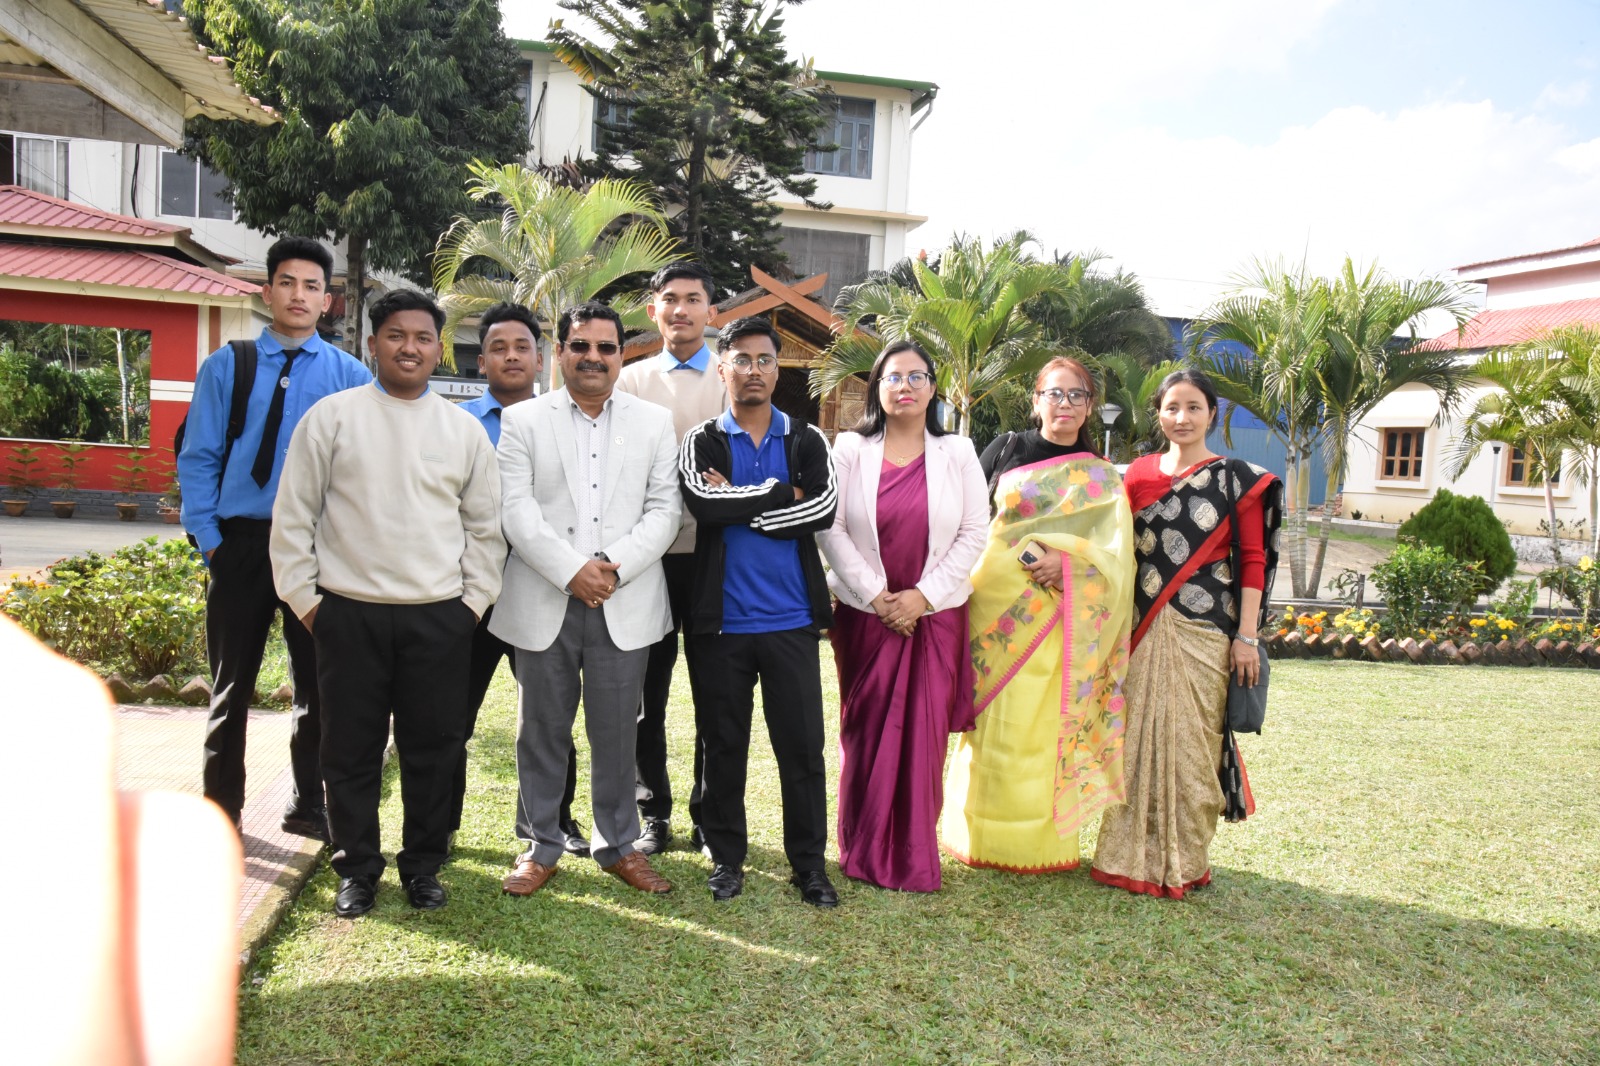 IBSD organised Open Day for school students from Imphal to visit labs and interact with Scientists about various research areas of Bioresources. This activity was organised by IBSD under the “Science for Society” program. photos